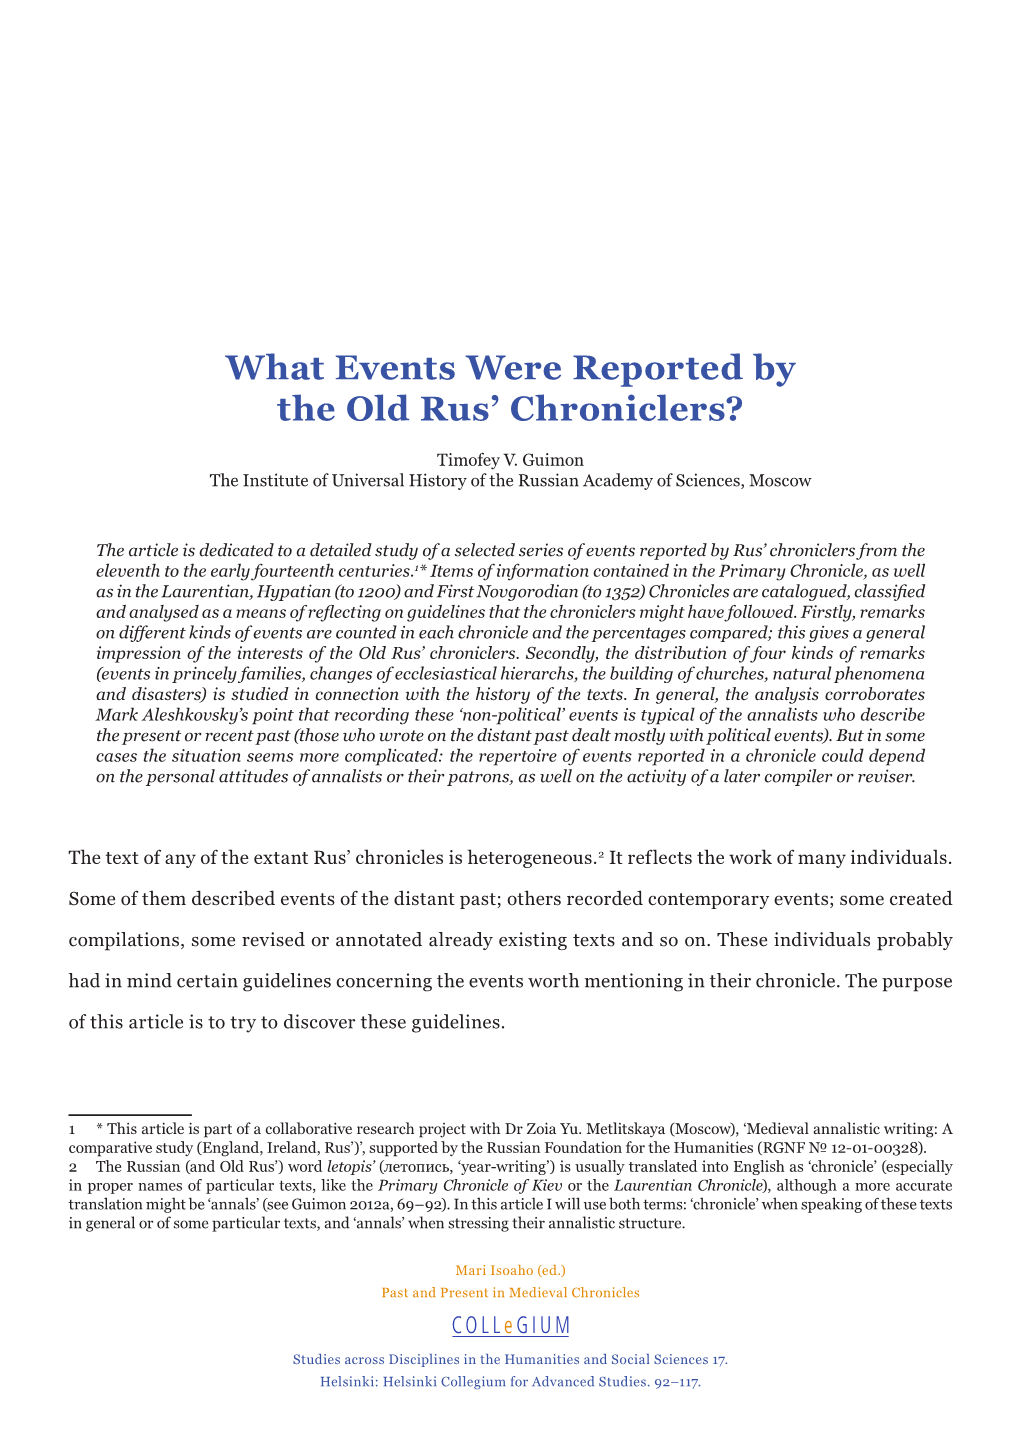 What Events Were Reported by the Old Rus' Chroniclers?